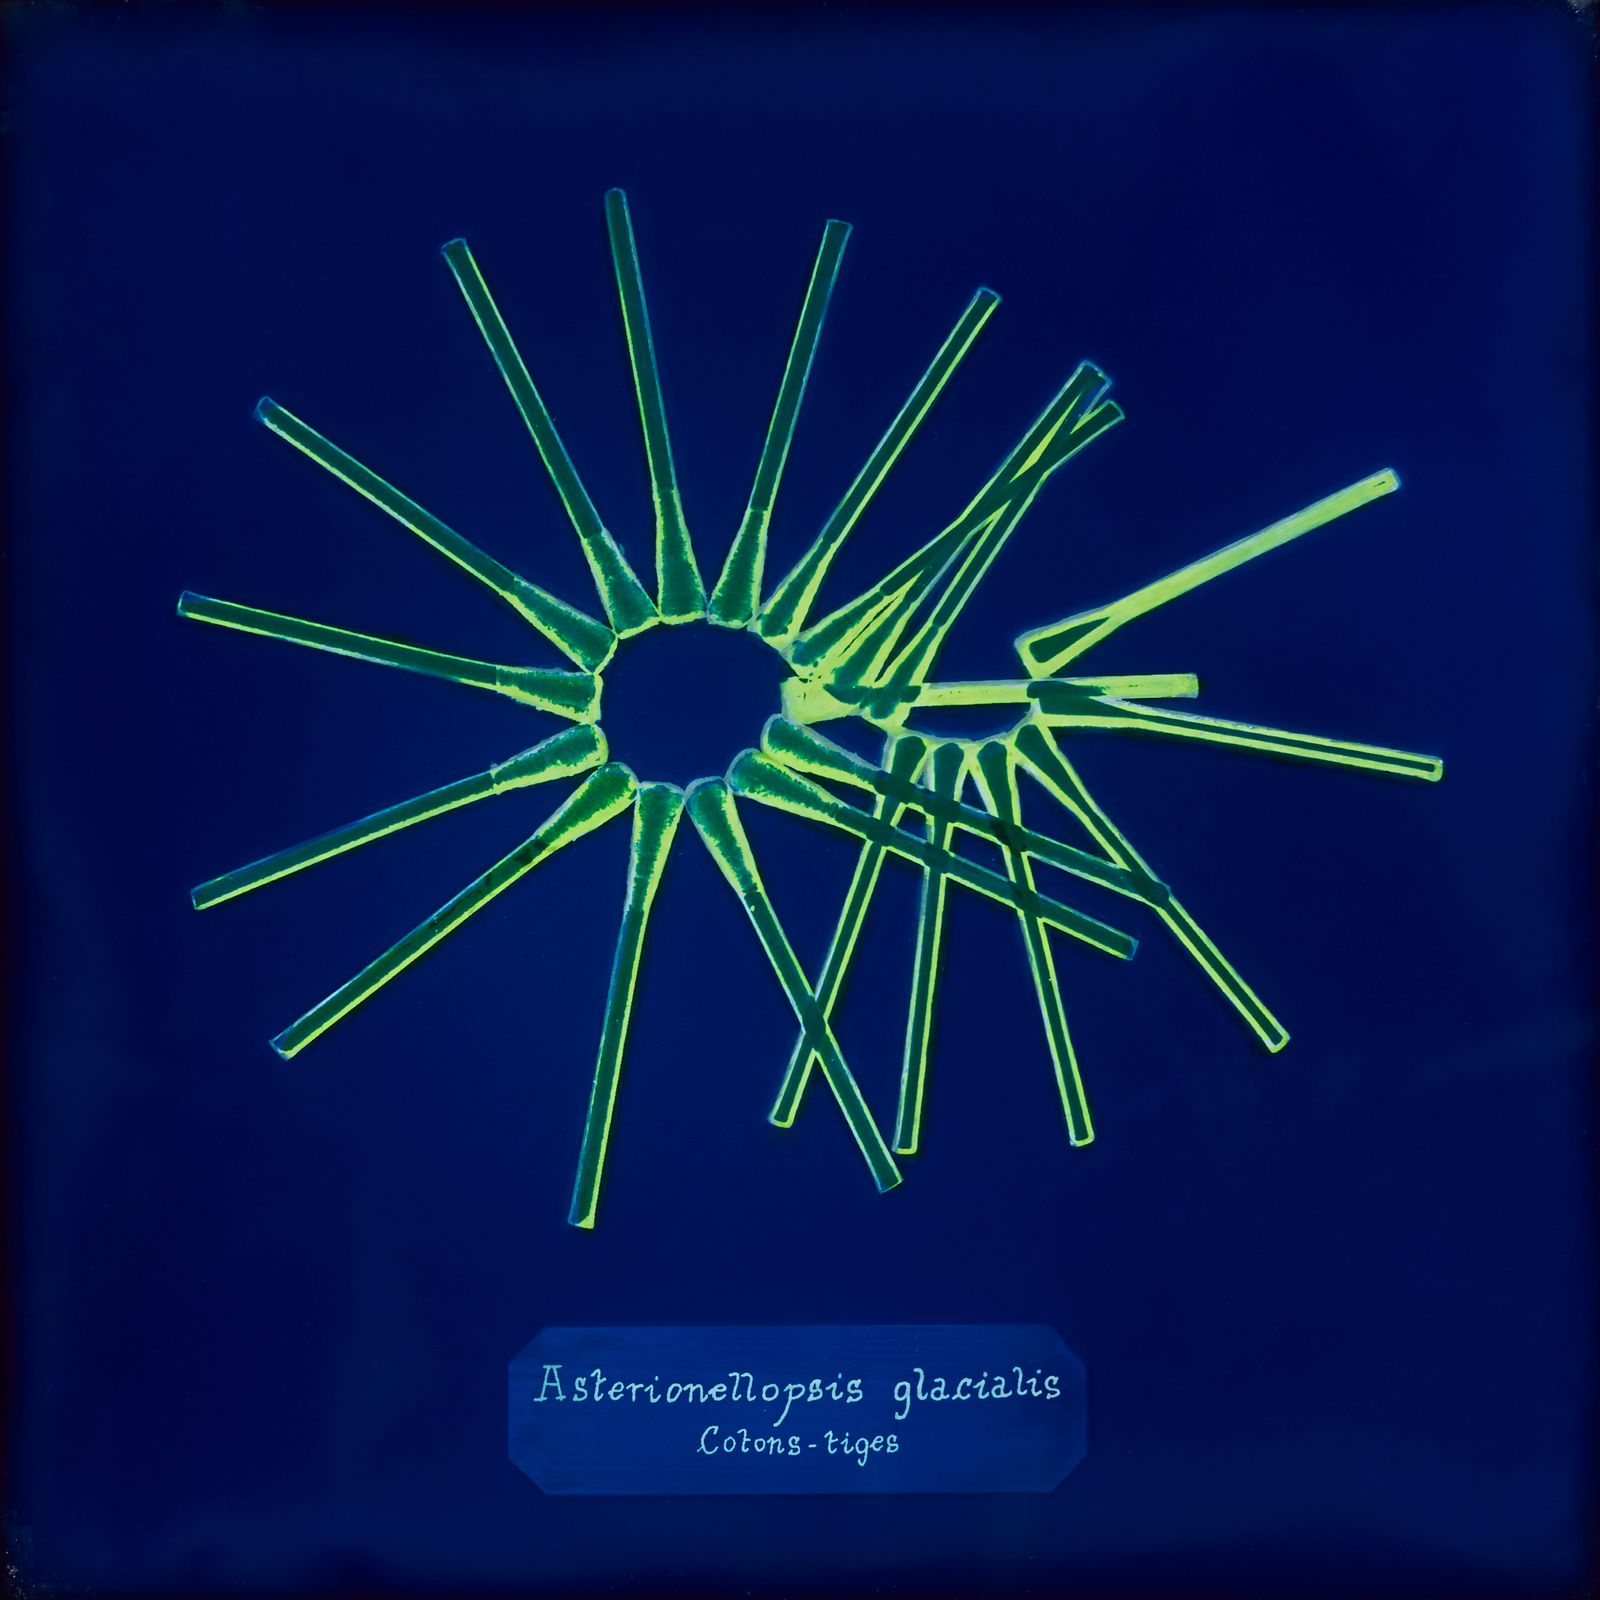 © Manon Lanjouère - Asterionellopsis glacialis, Q-tips, Cyanotype on glass and fluorescent vynil emulsion, 20x20 cm